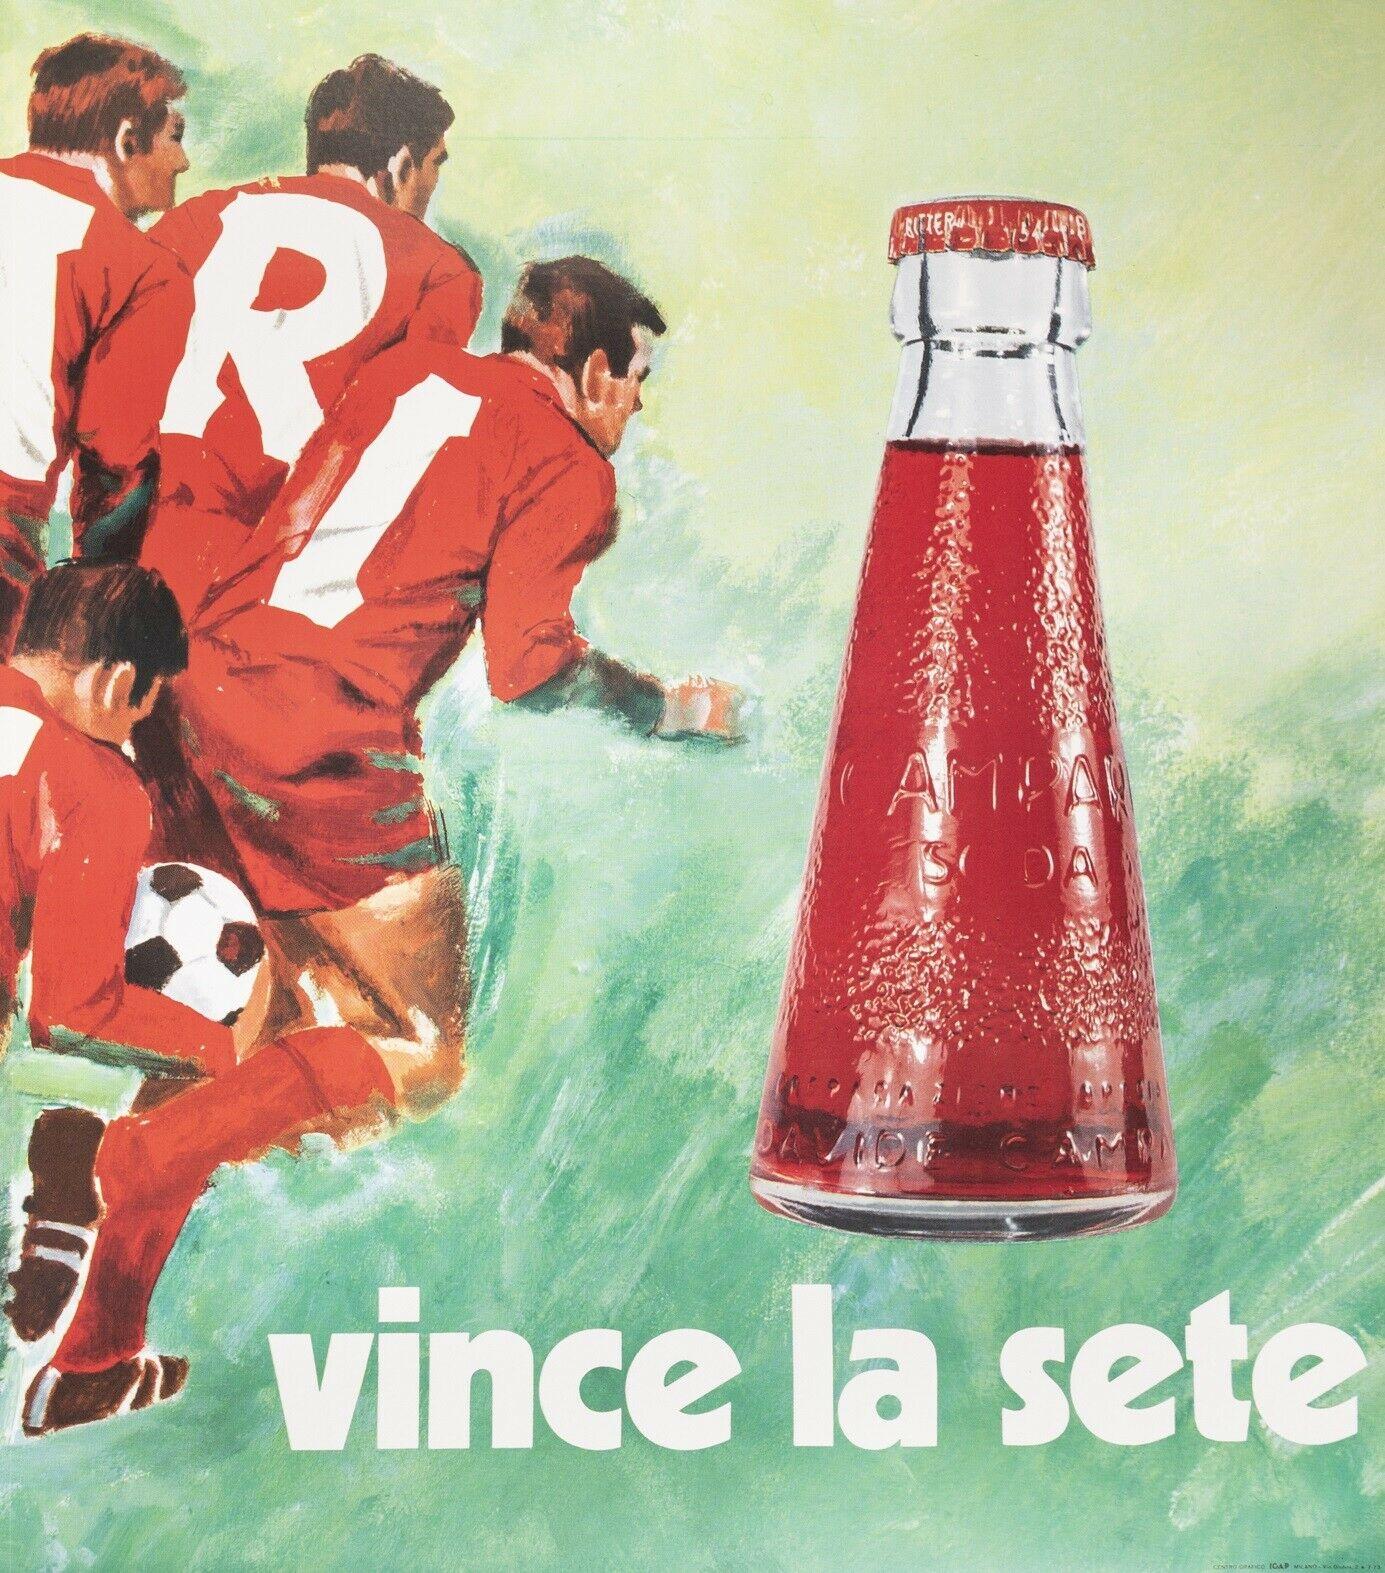 Original Vintage Poster-Pijoan-Campari Soda-Soccer-Liqueur, c.1970
Advertising posters for Campari Soda. A football/soccer team with red jerseys promotes the brand.

Additional Details:
Materials and Techniques: Colour lithograph on